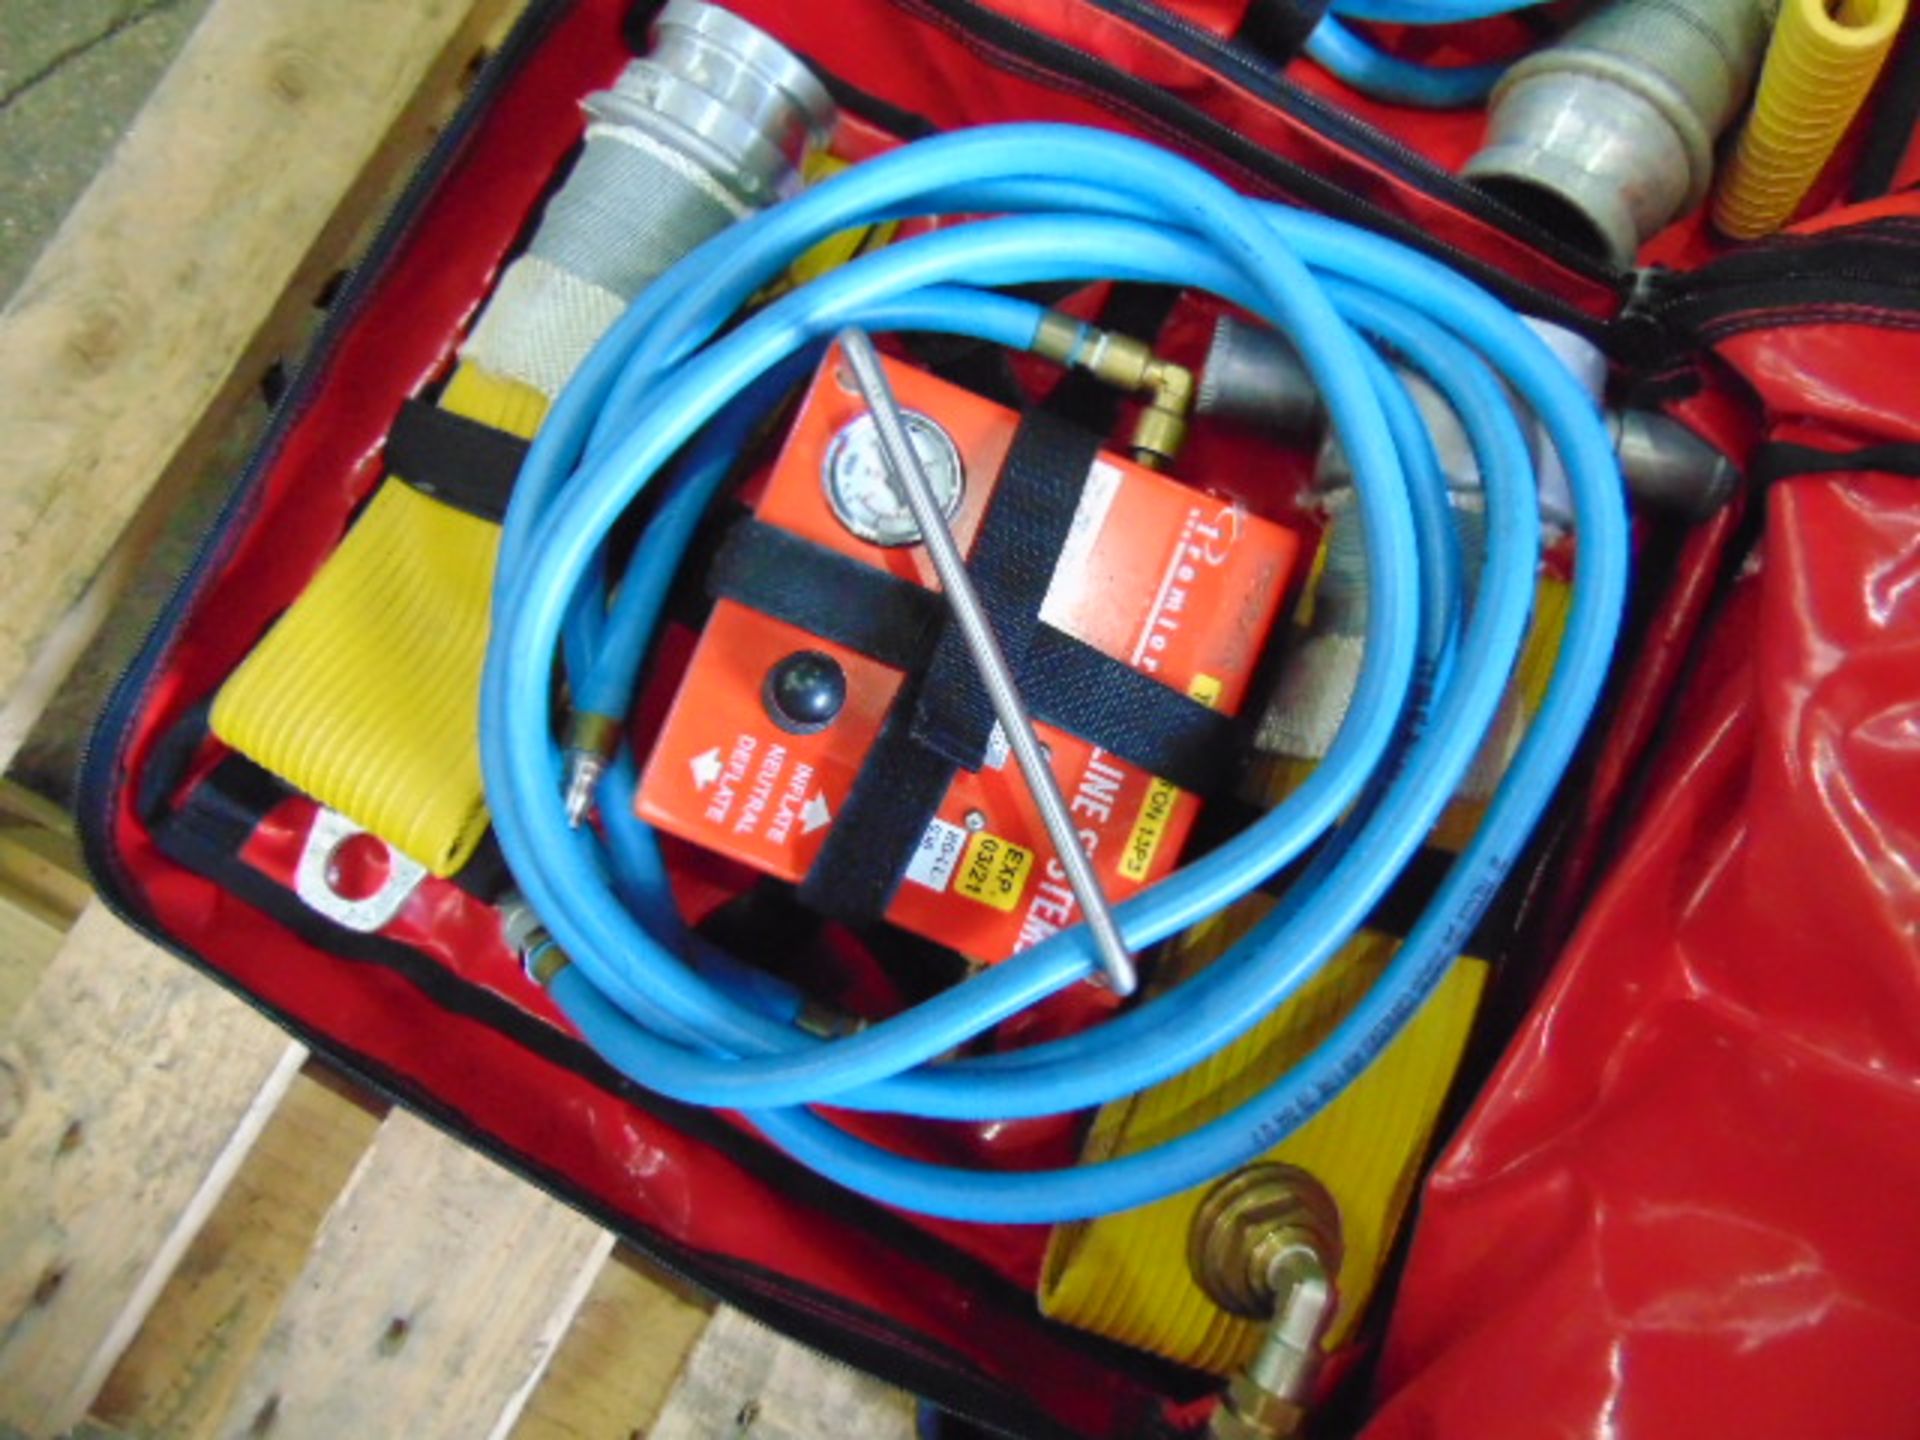 QTY 2 x Premier Lifeline Hose Inflation Systems - Image 2 of 5